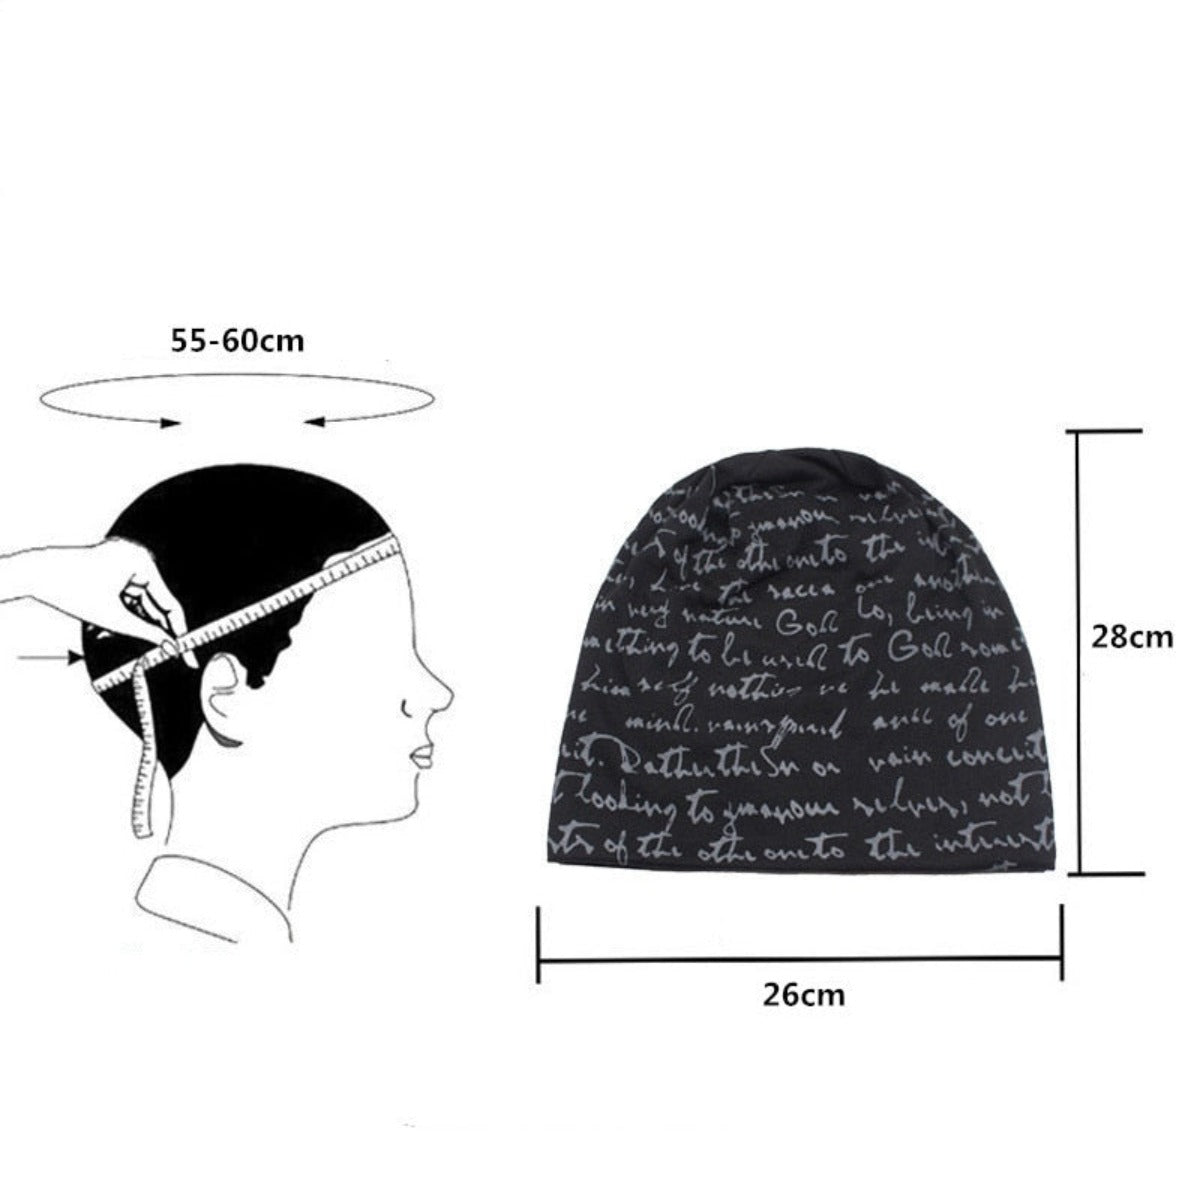 A Fashionable Printed Beanie Hat made of cotton with writing on it.